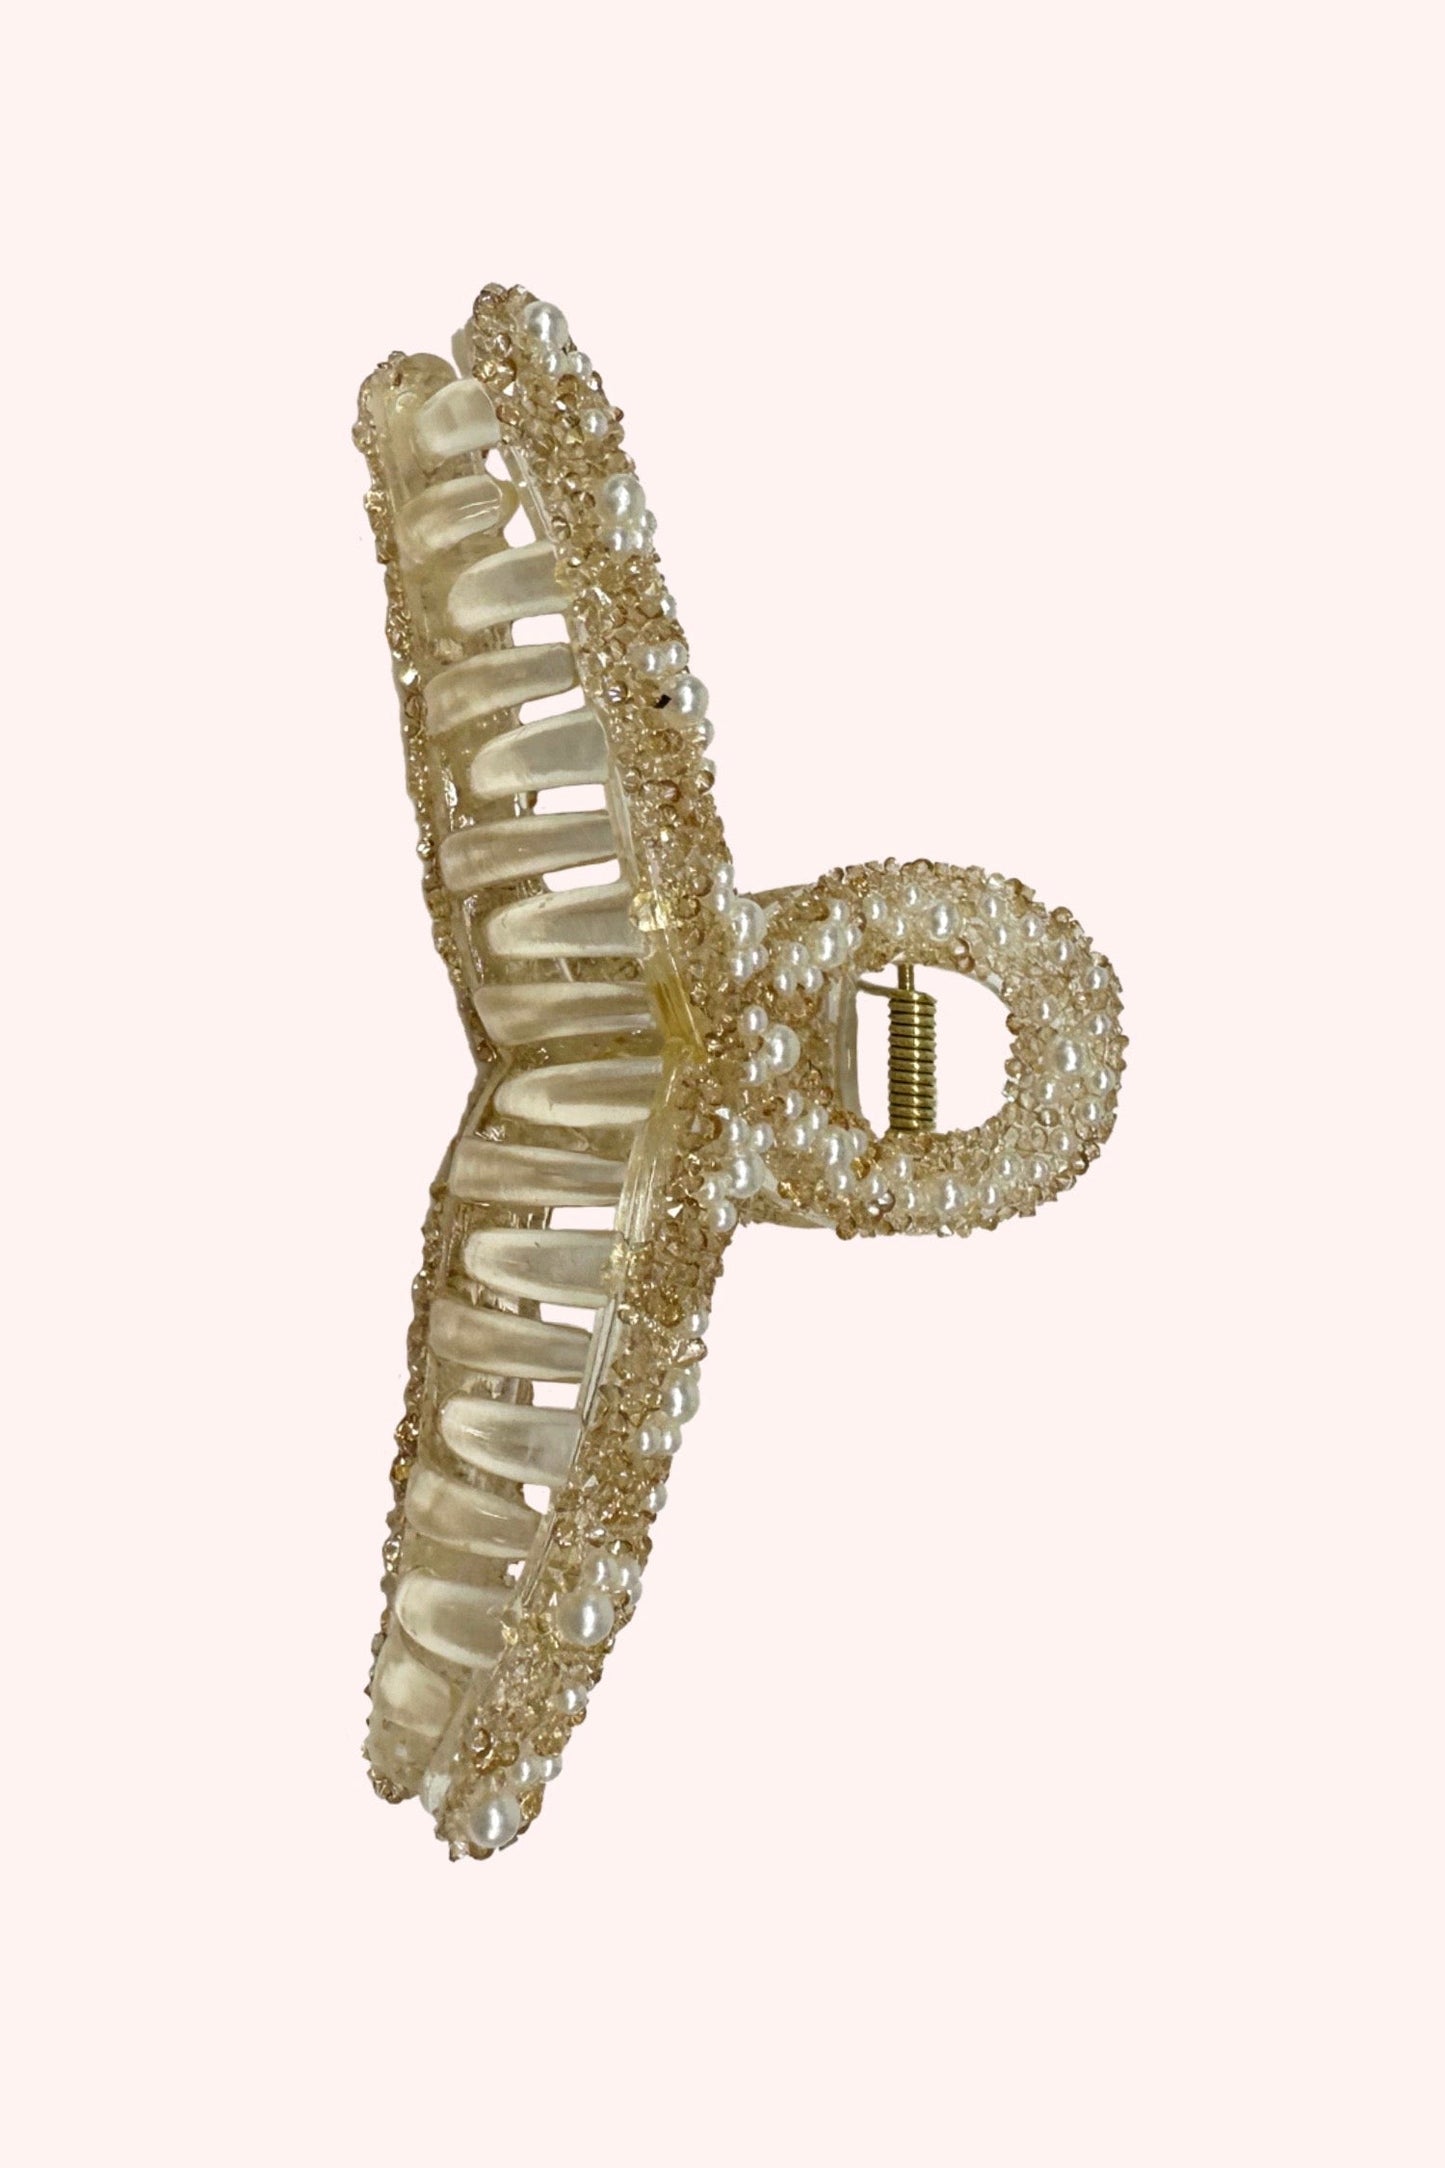 Large Pearl Encrusted Jaw Clip beige color with pearls, large grips, looks like a knot, strong grip